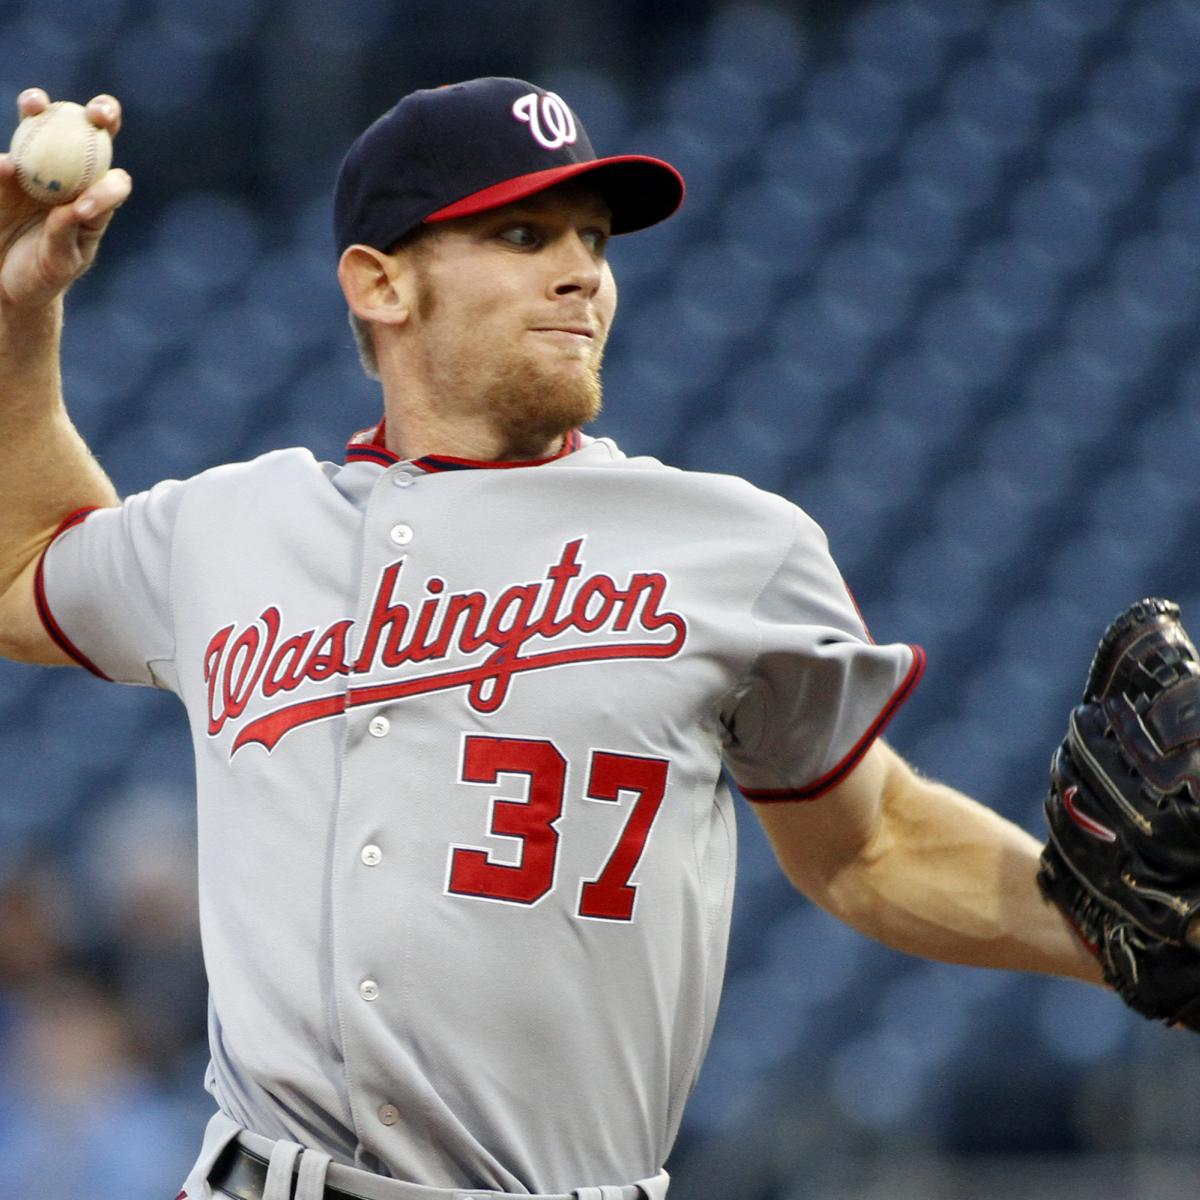 CBS Sports on X: The Washington Nationals had four players